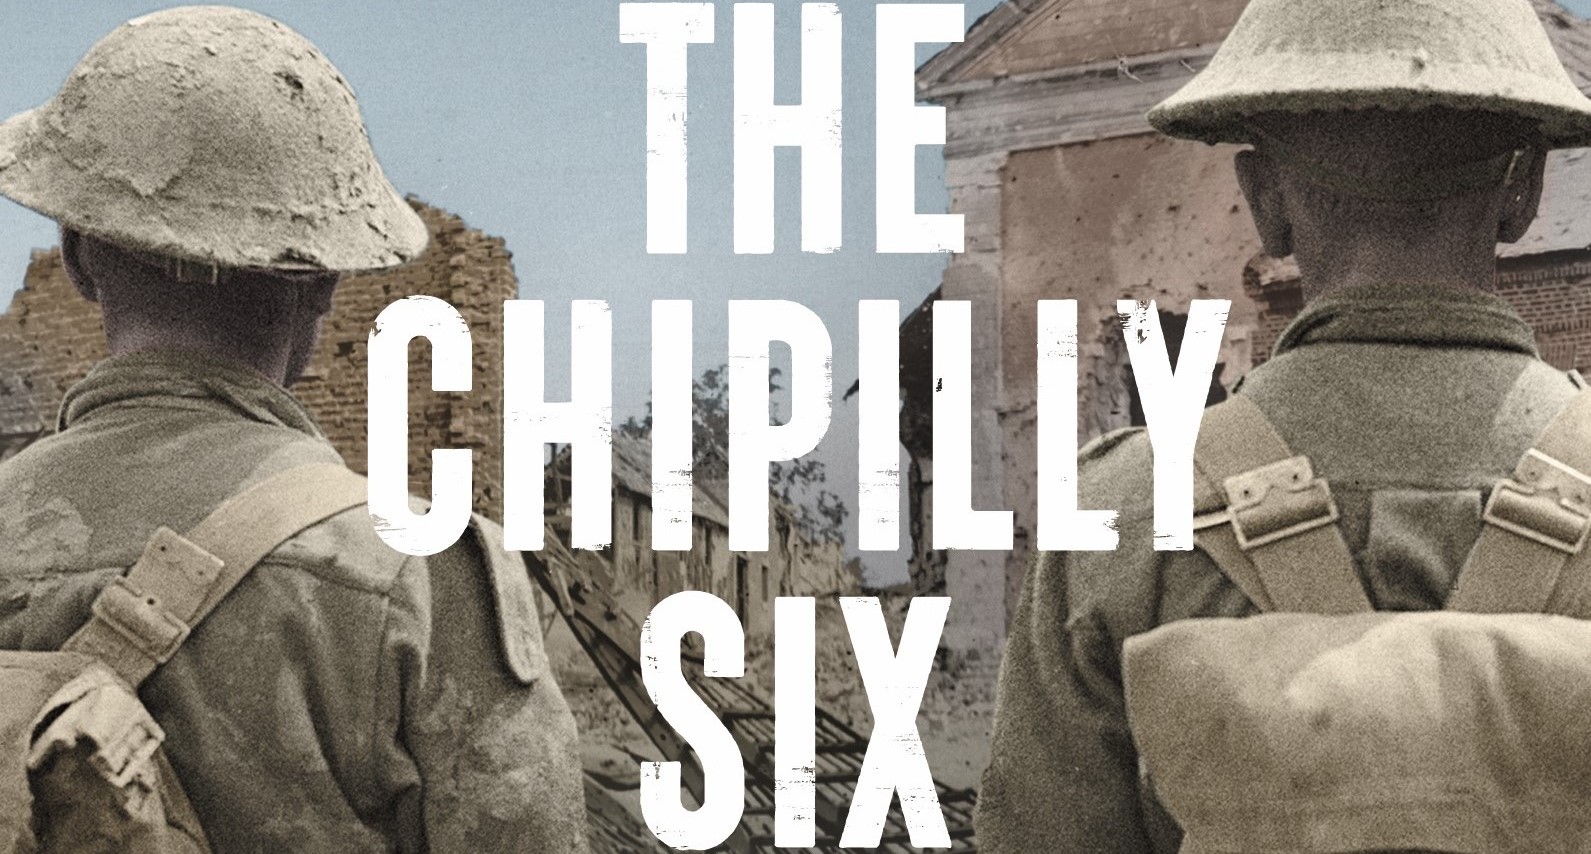 The Chipilly Six